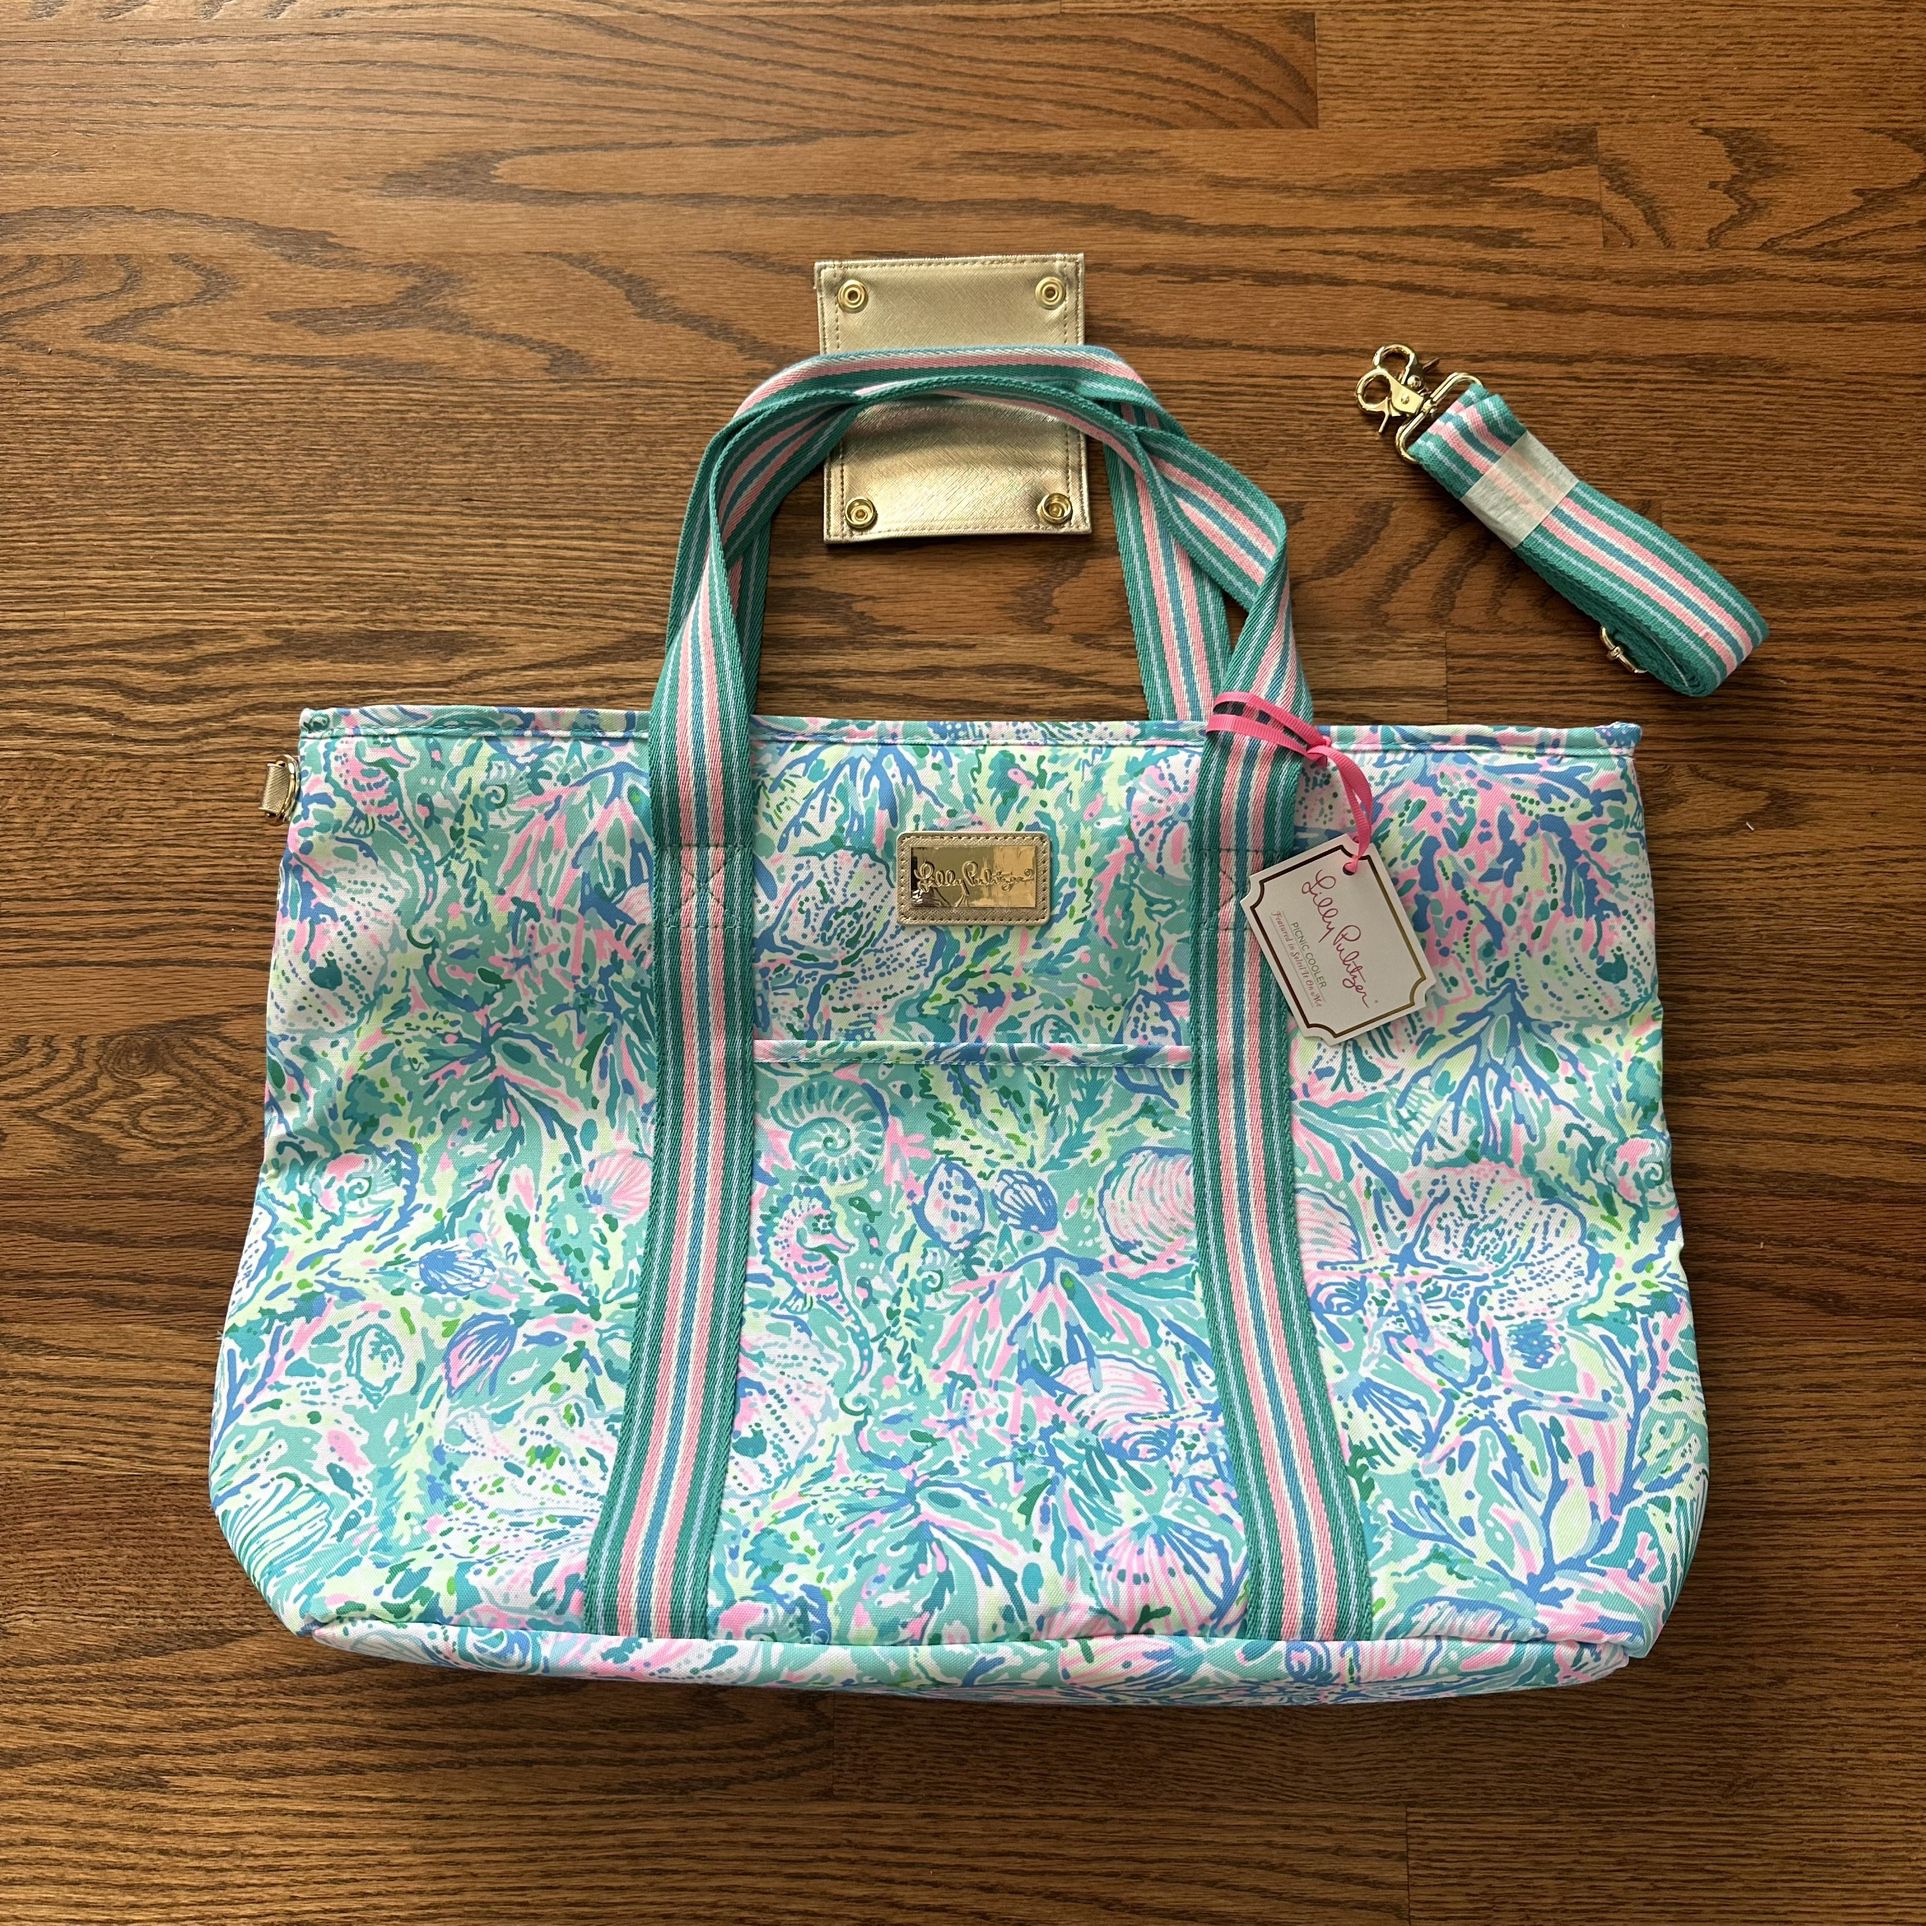 NWT Lilly Pulitzer Picnic Cooler Tote Bag Solei It On Me